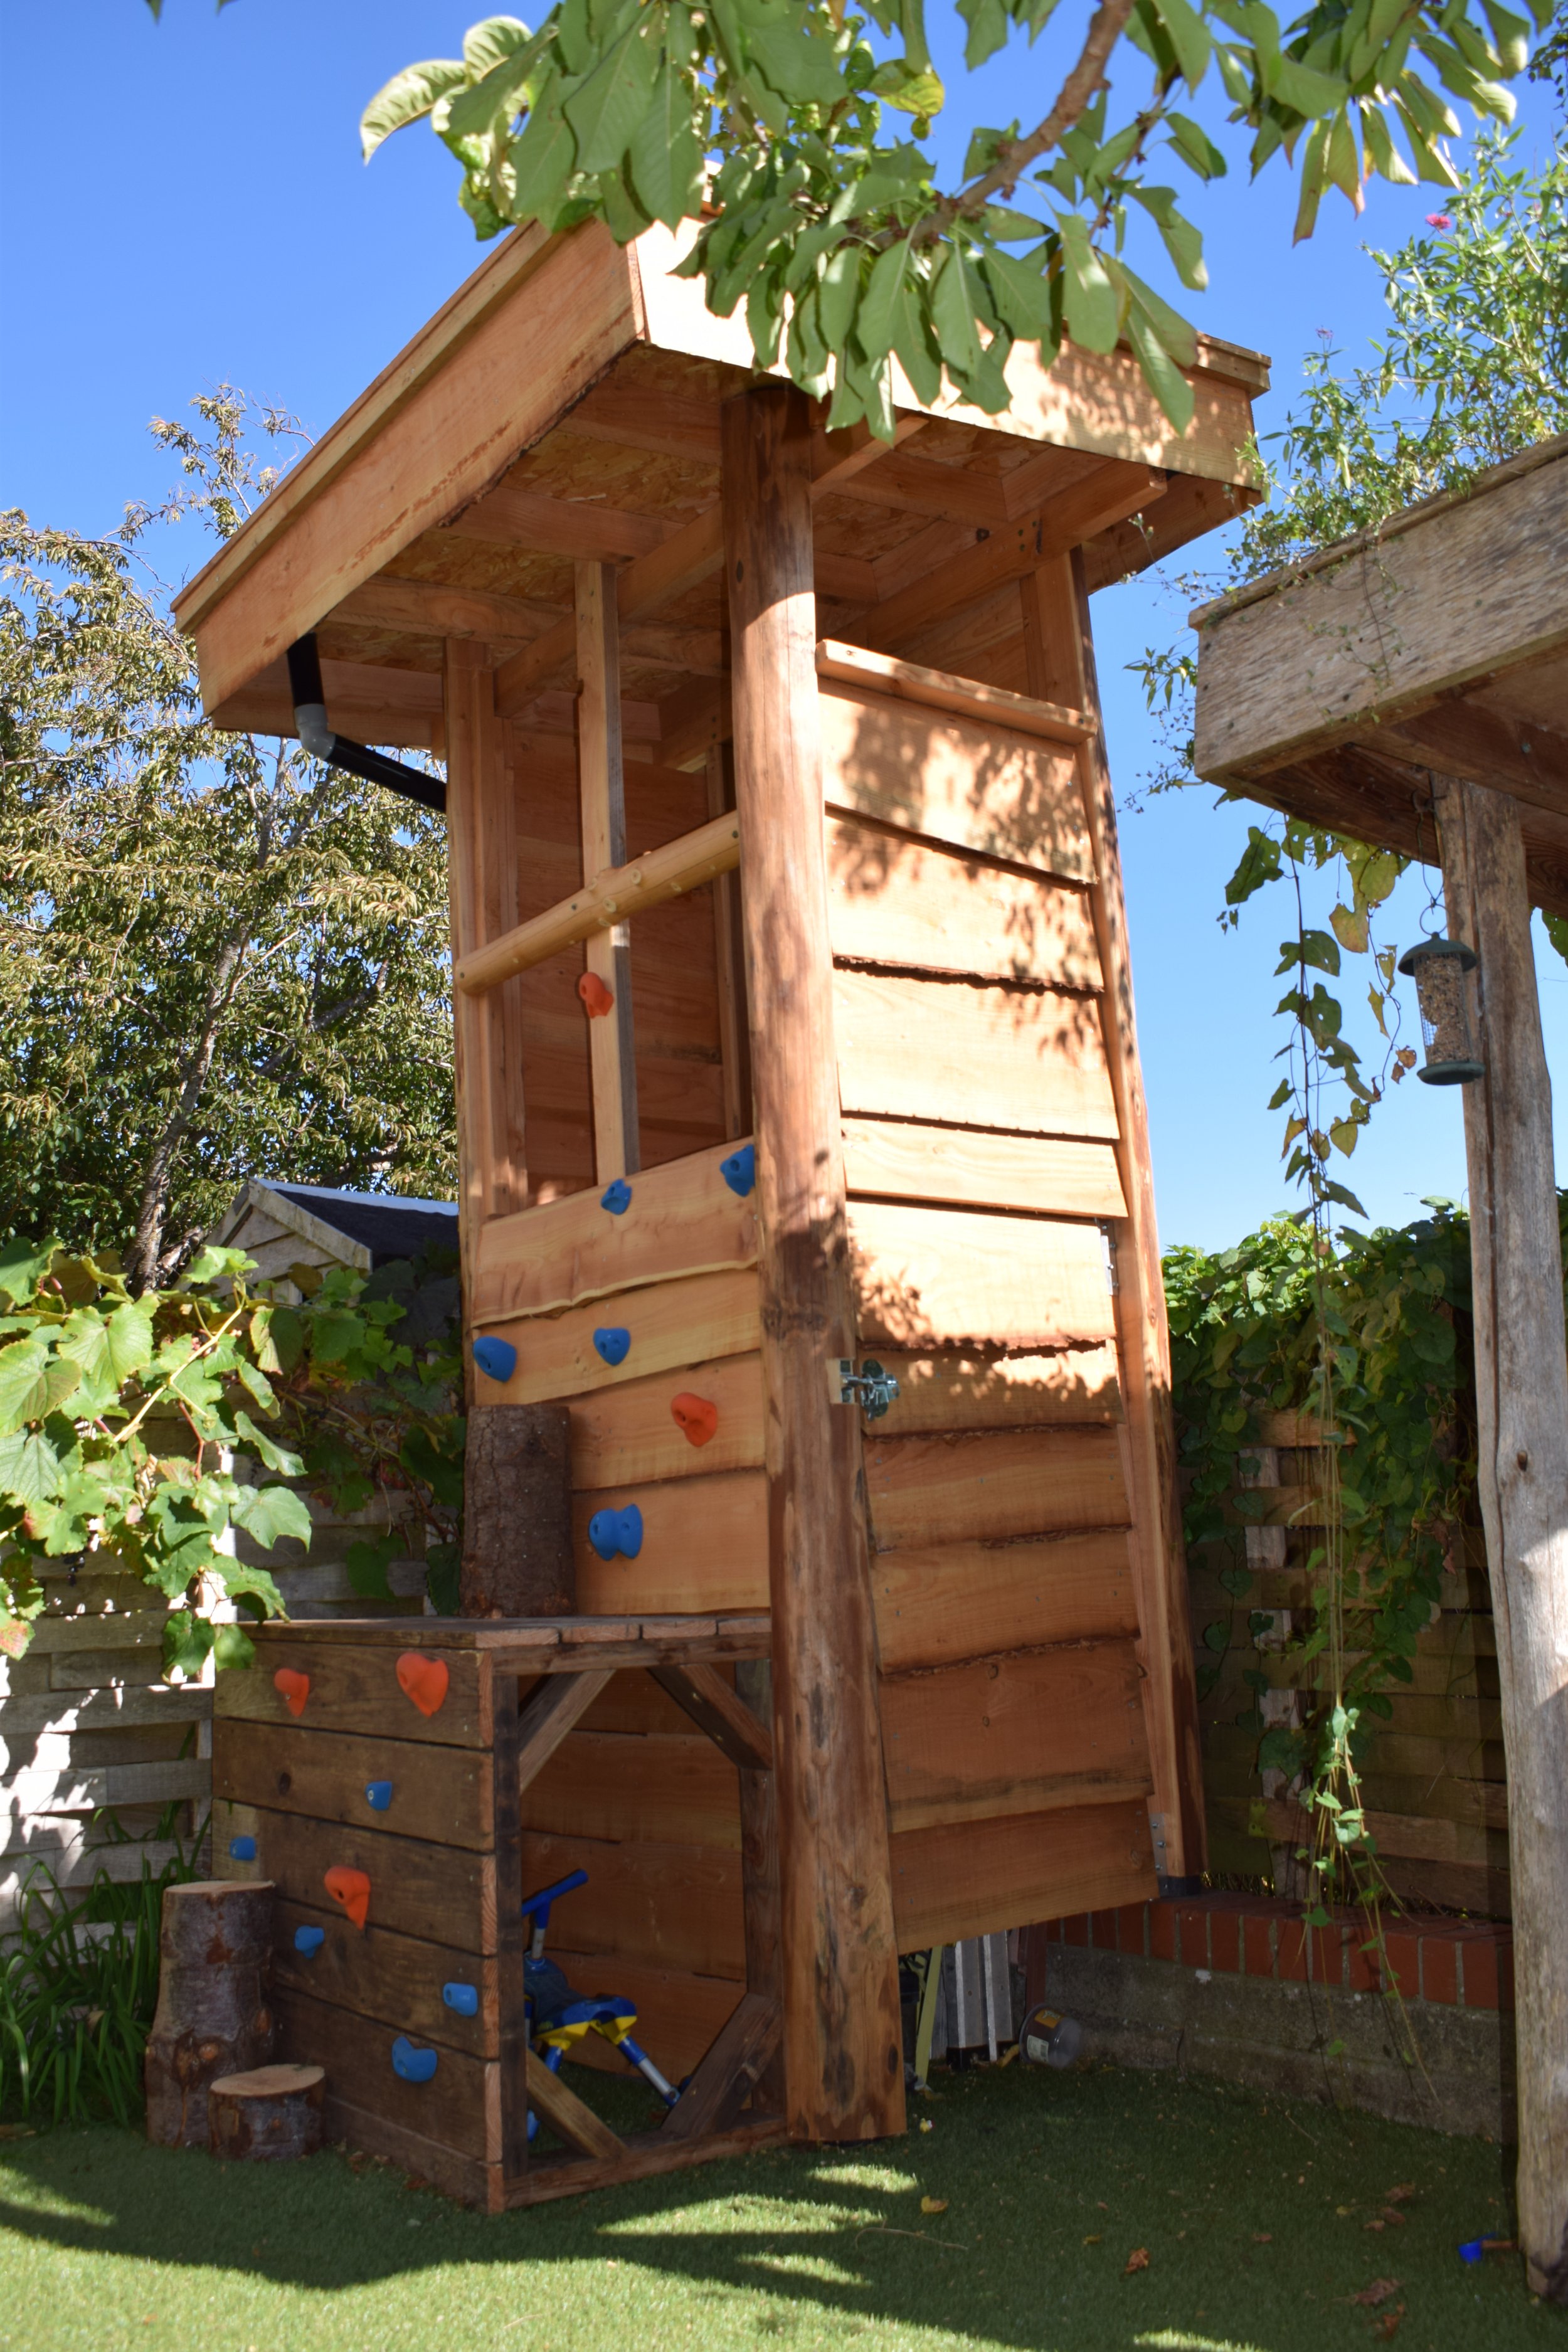 Garden Play Tower and Shed